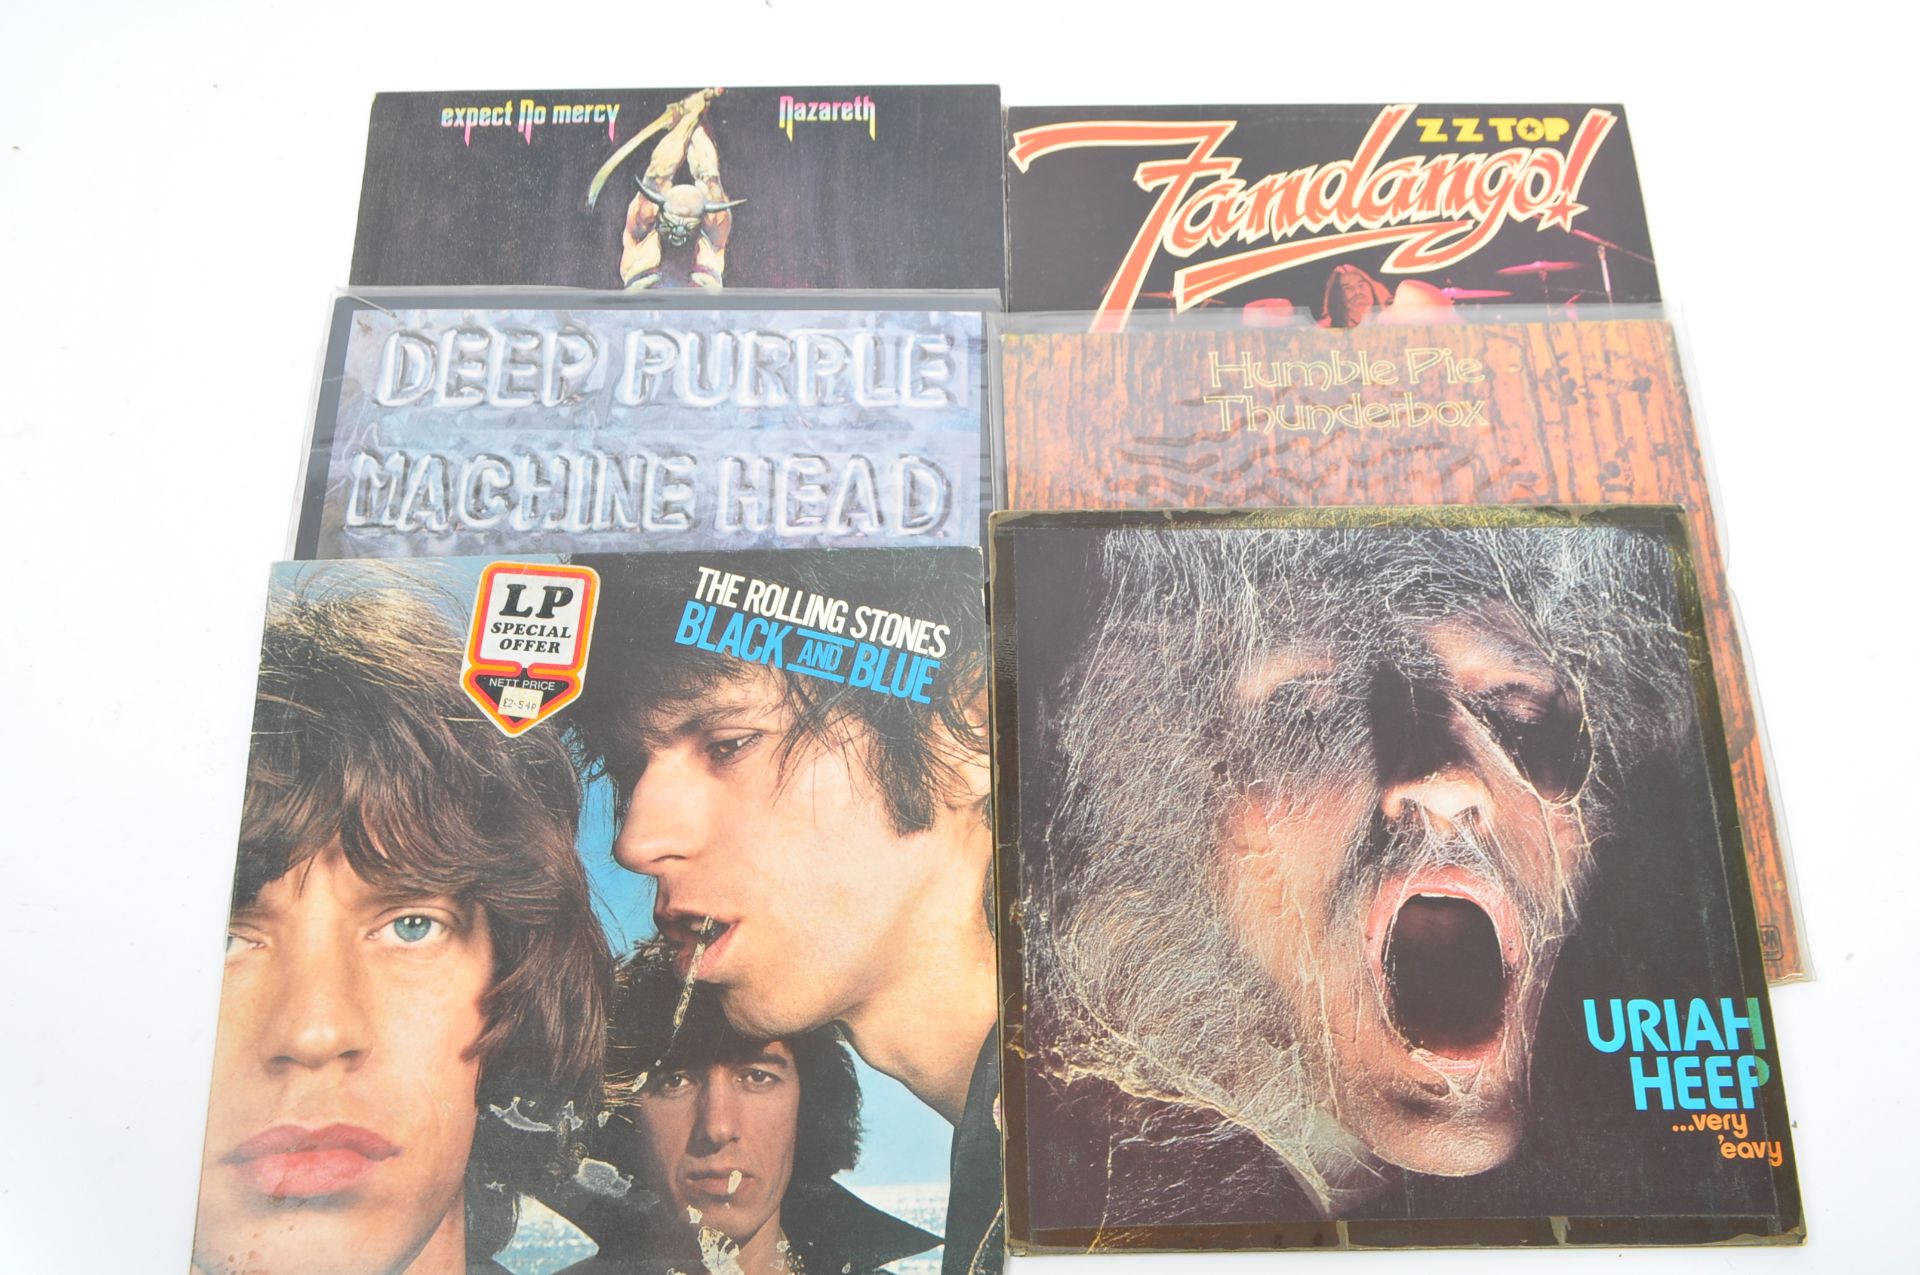 COLLECTION OF LONG PLAY 33 RPM VINYL RECORD ALBUMS - Image 2 of 3